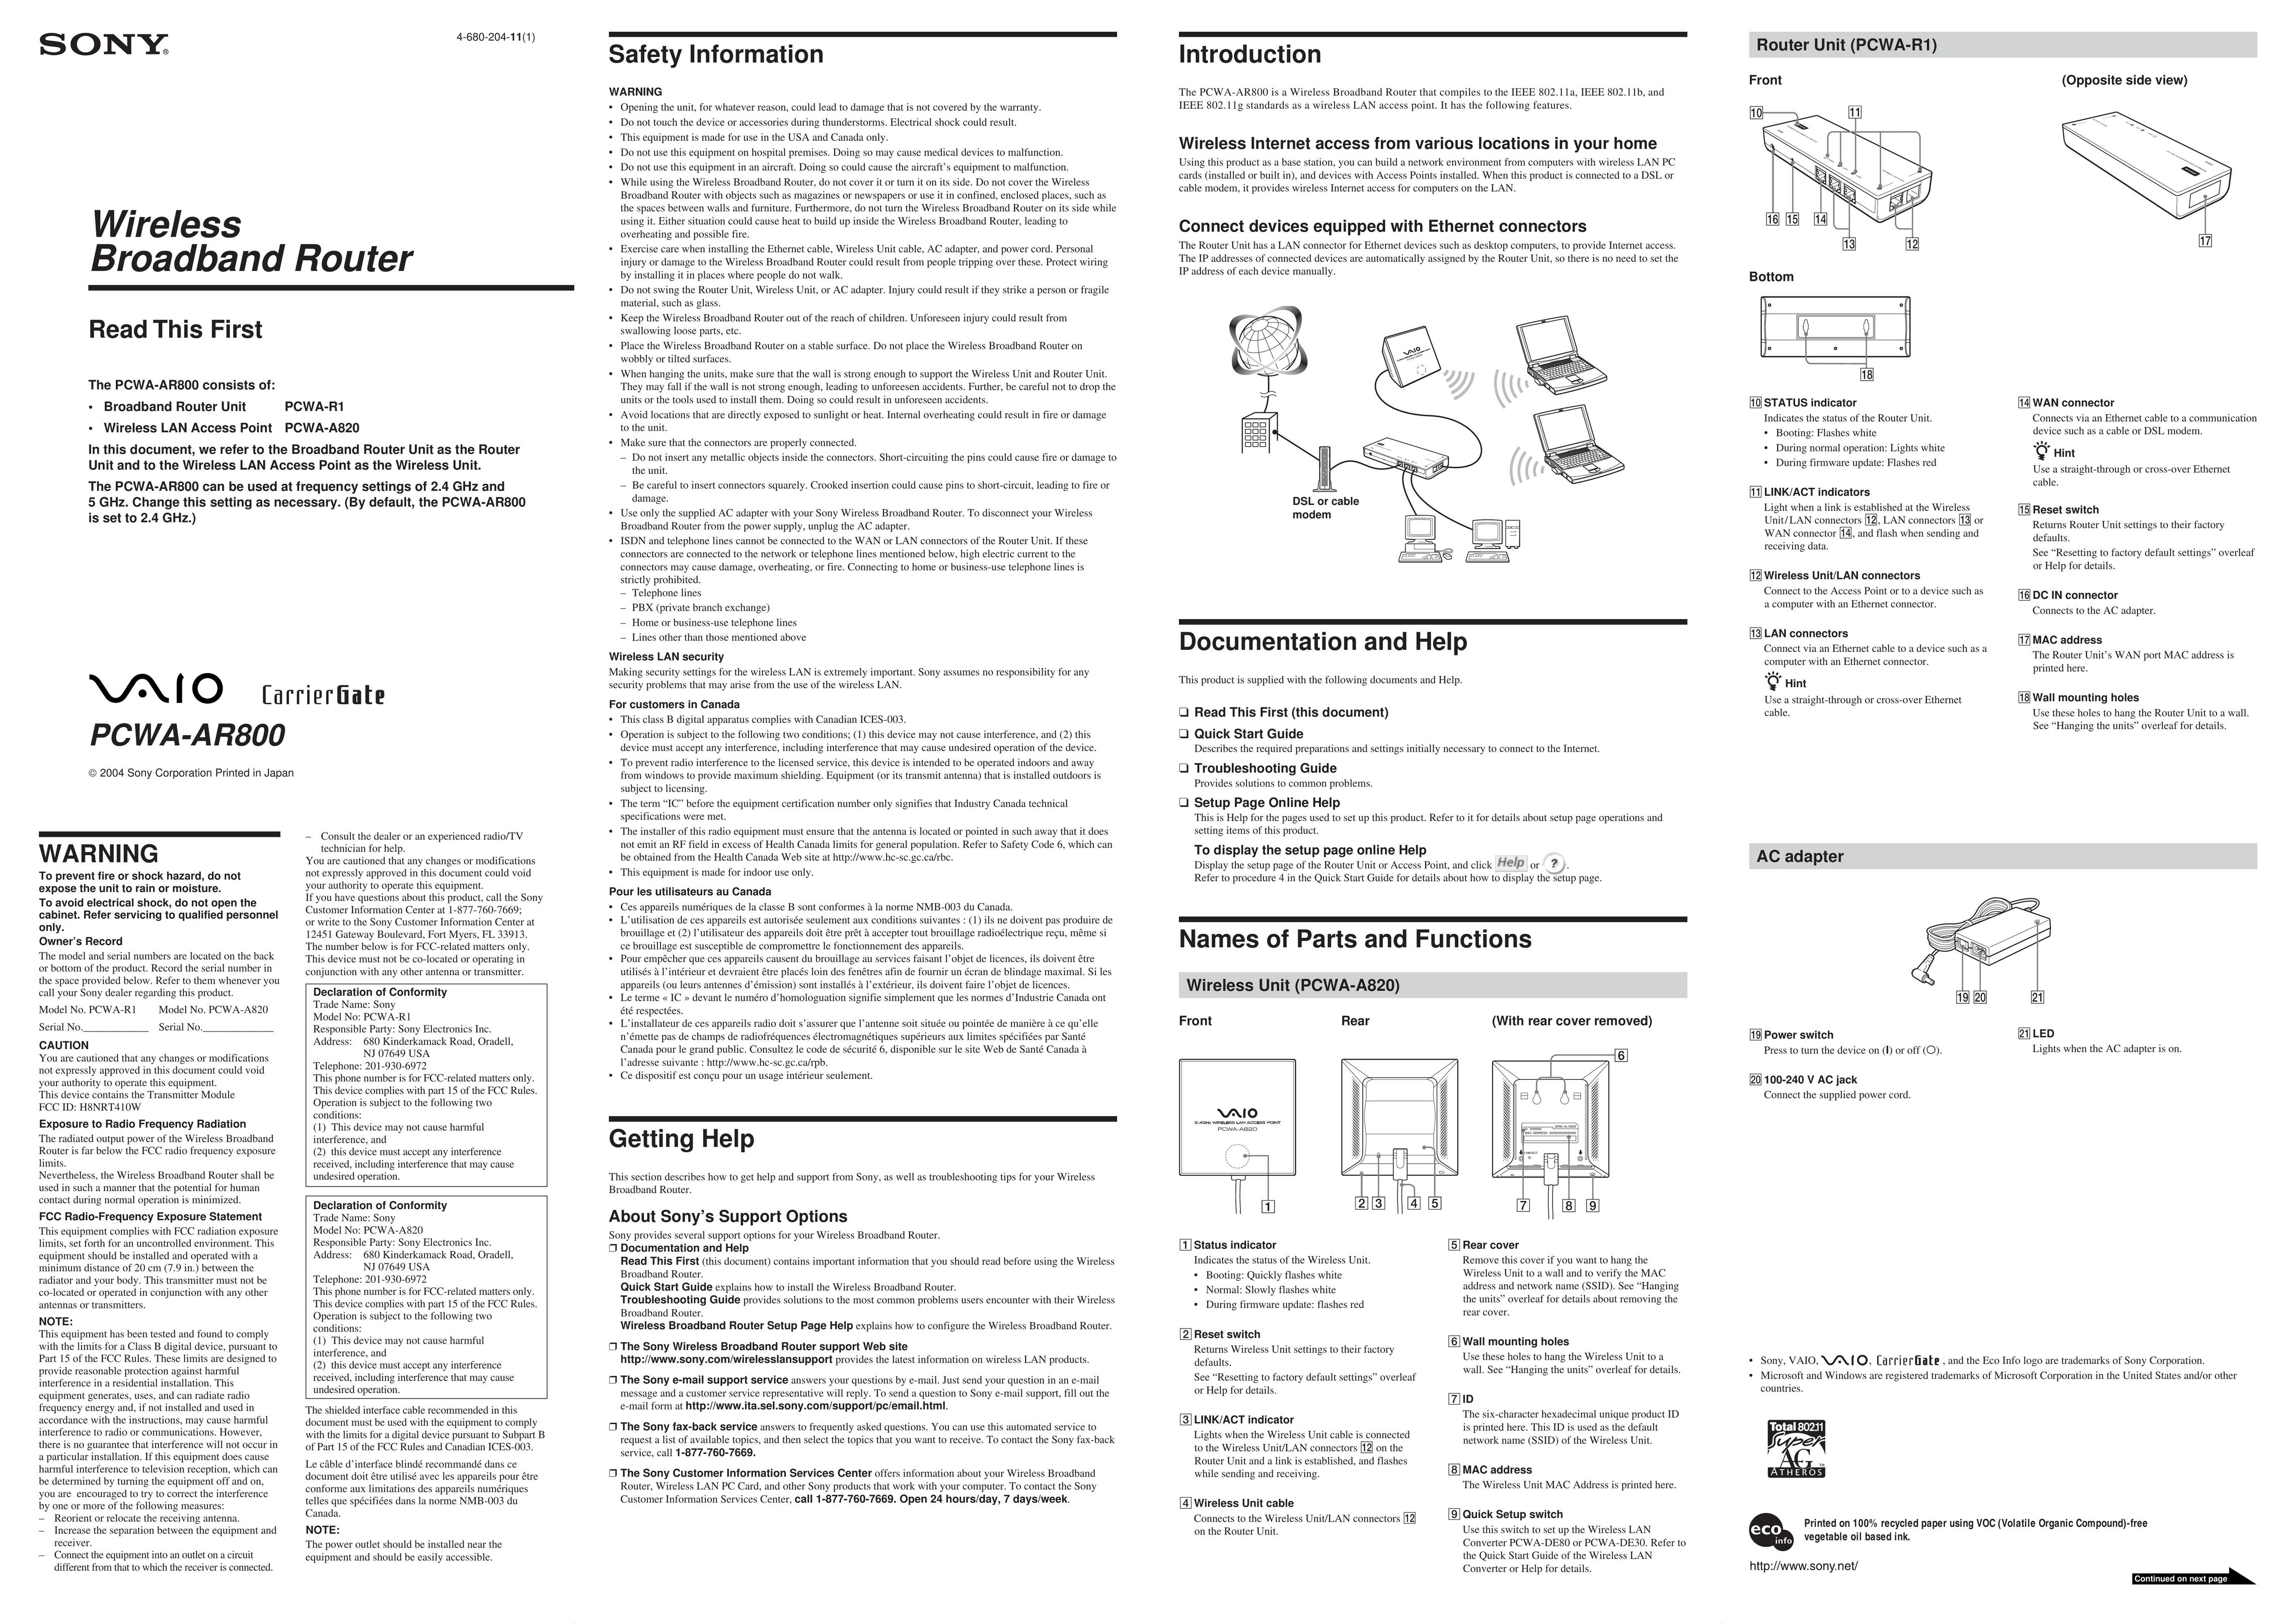 Sony PCWA-AR800 Network Router User Manual